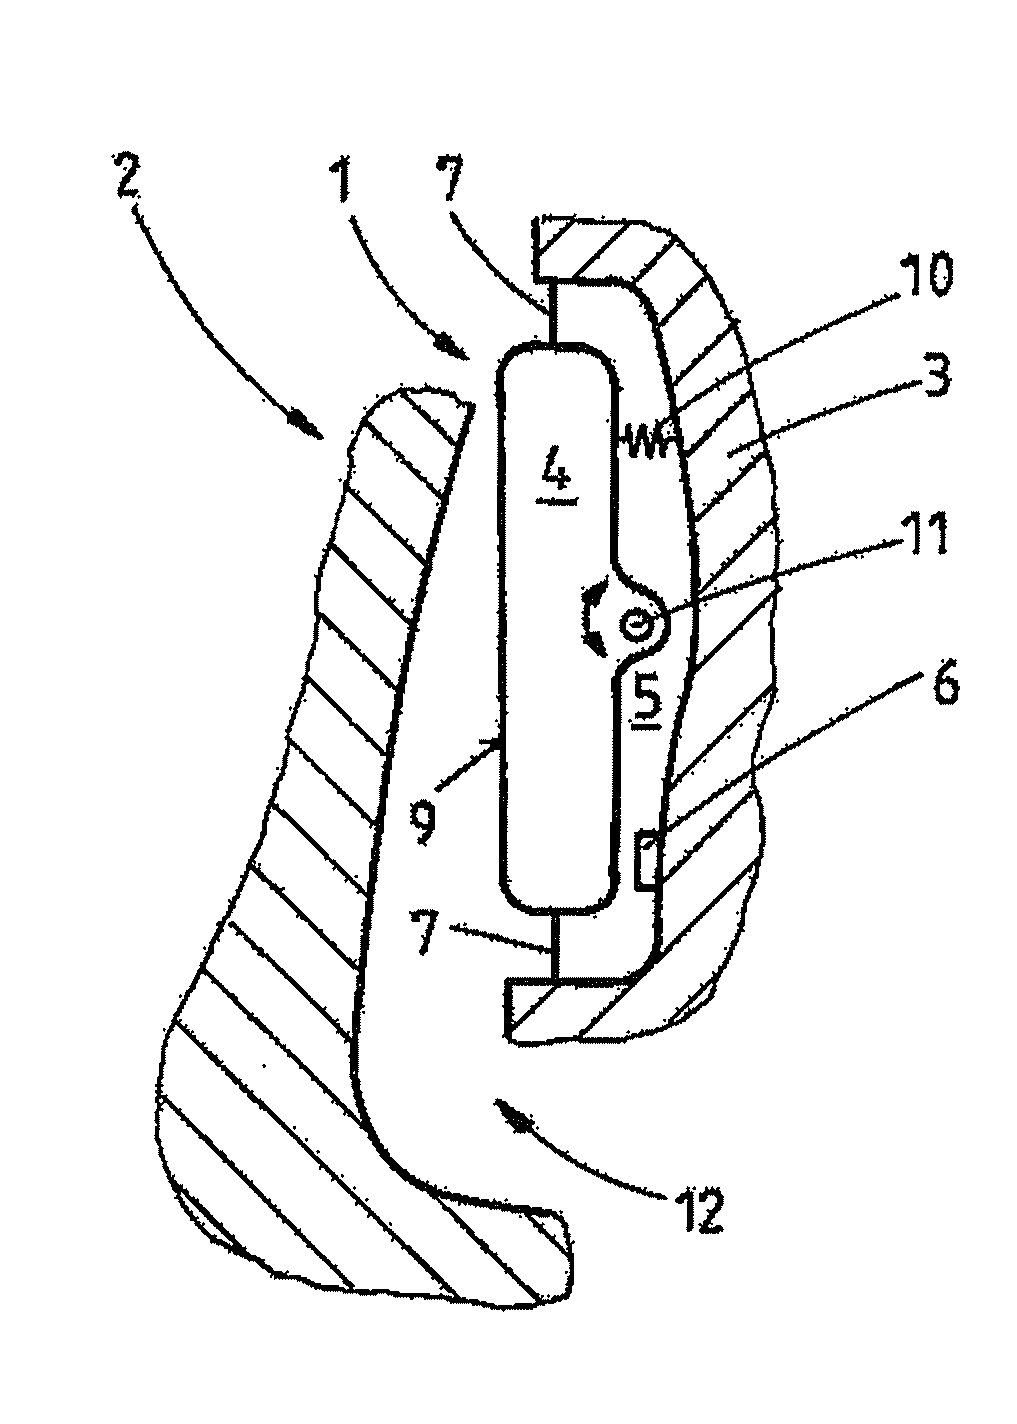 Actuating Device